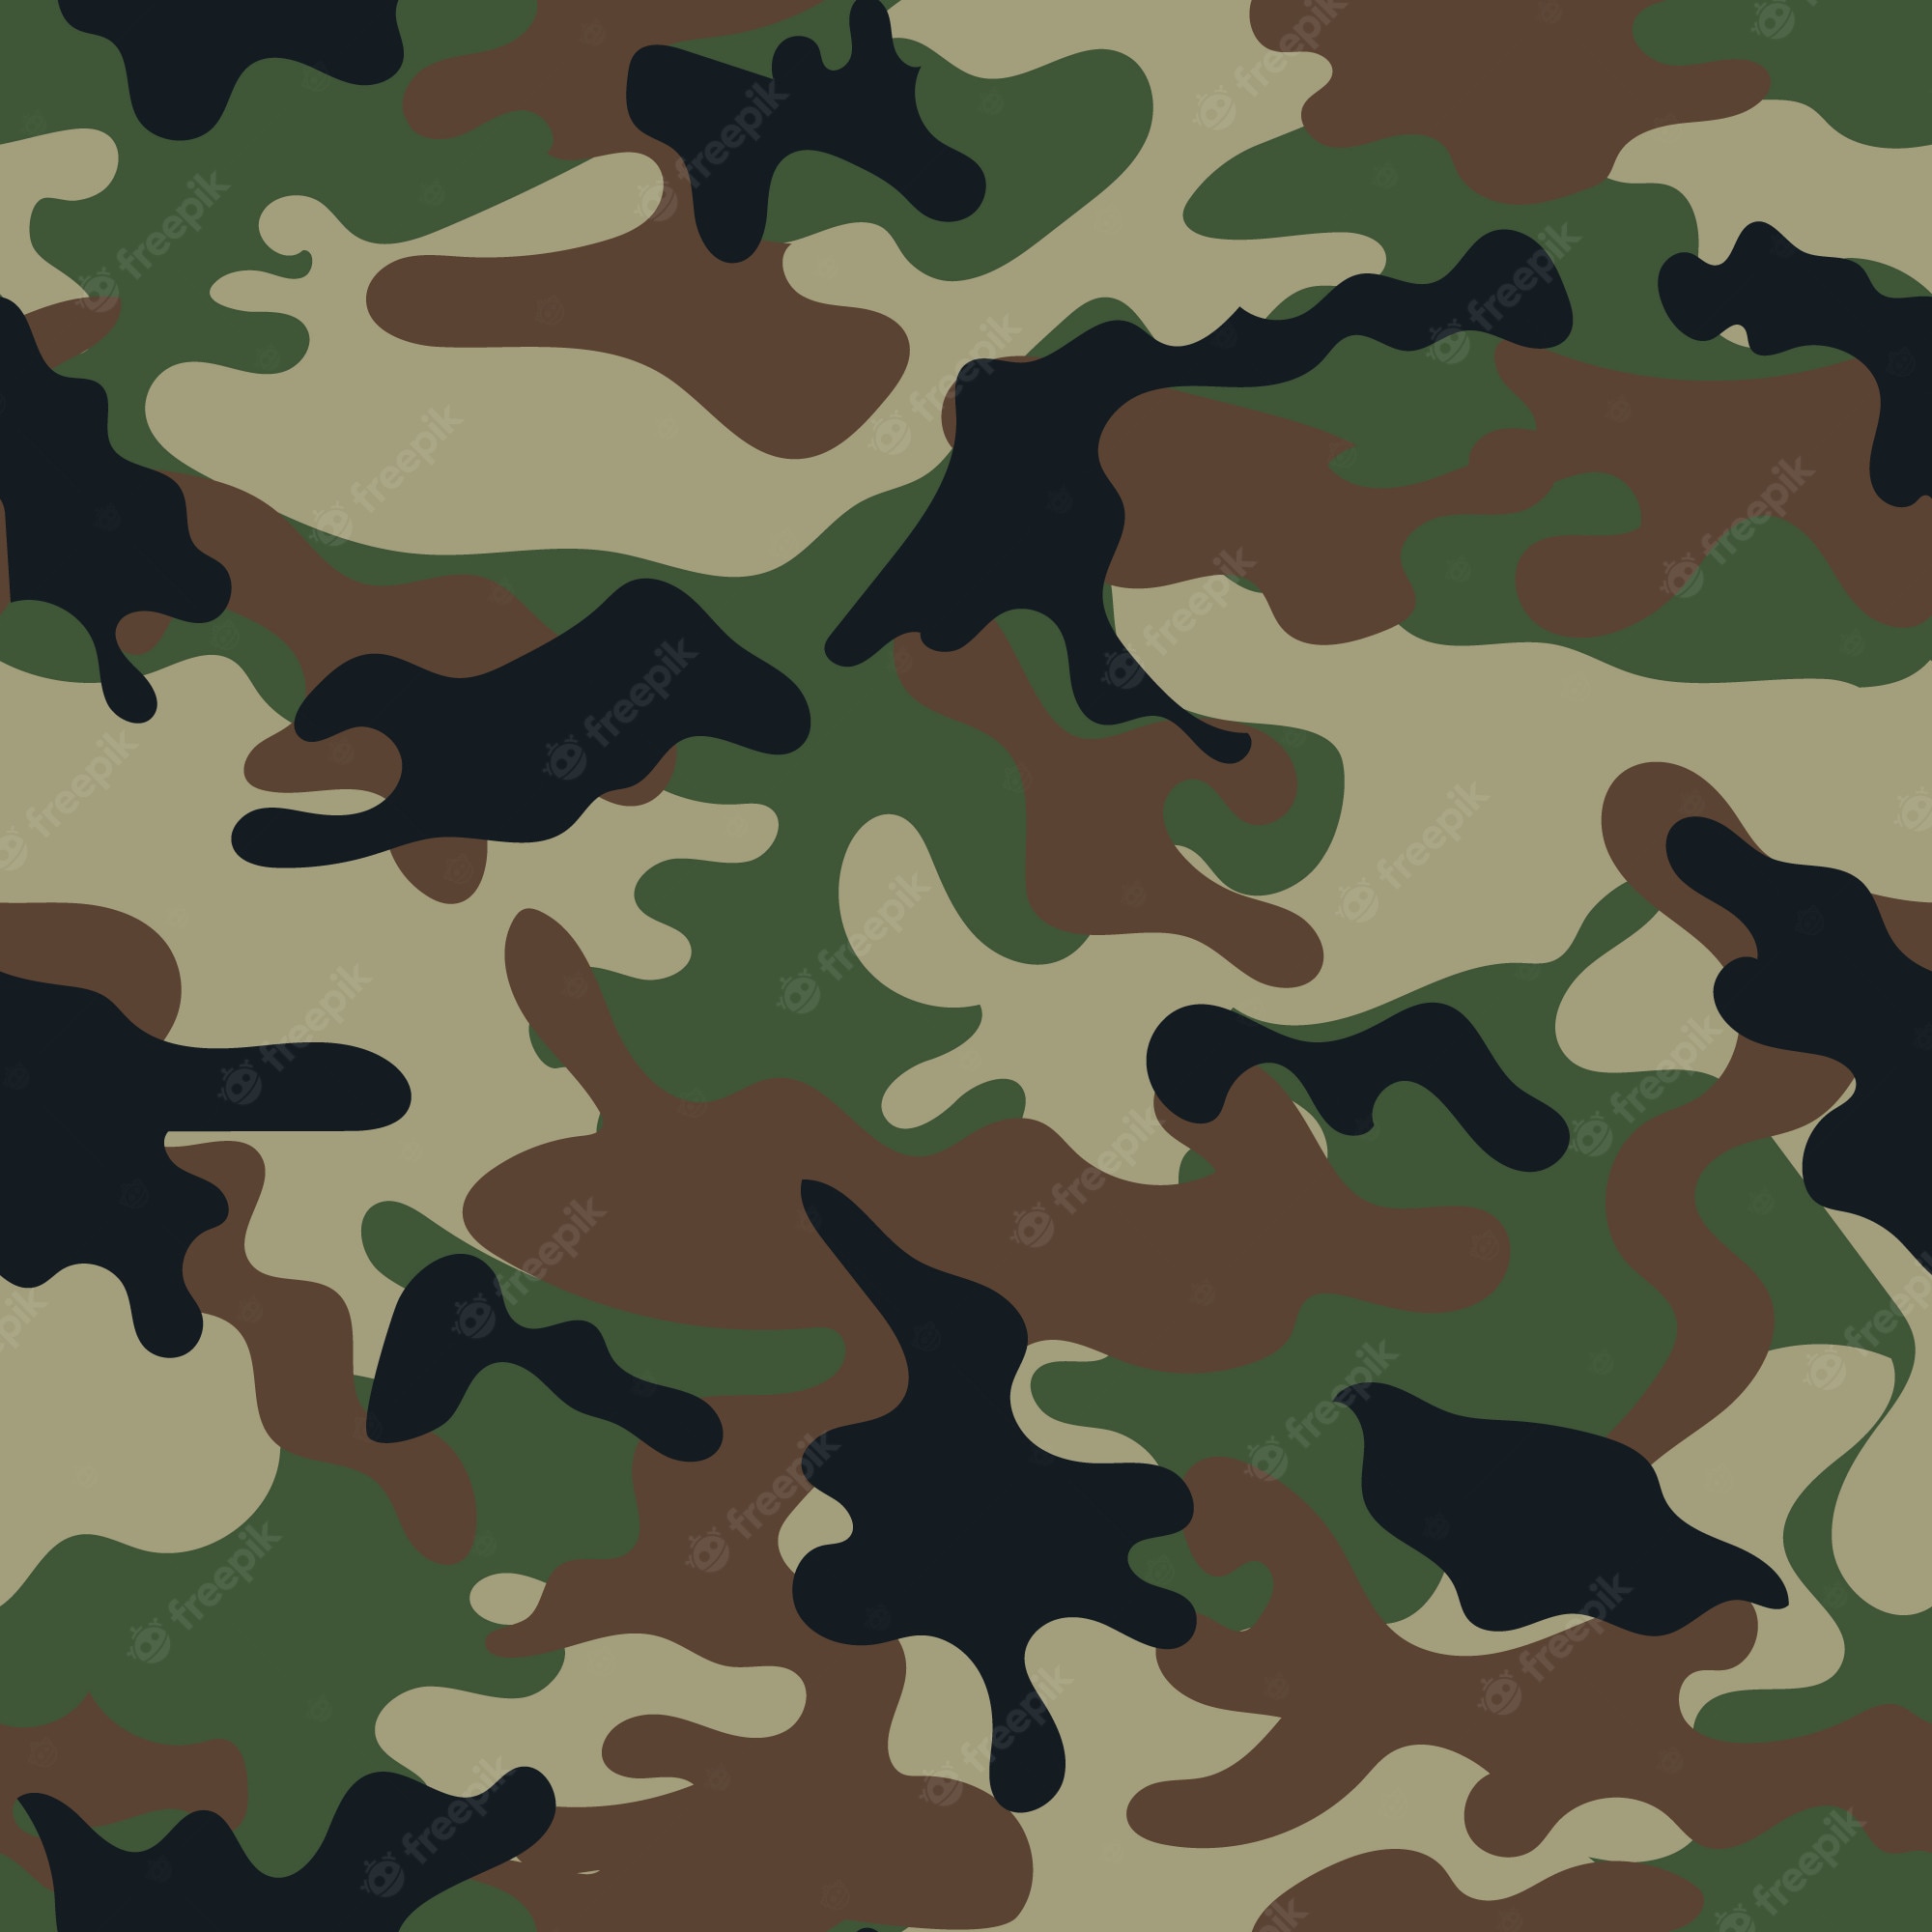 Army camouflage Image. Free Vectors, & PSD